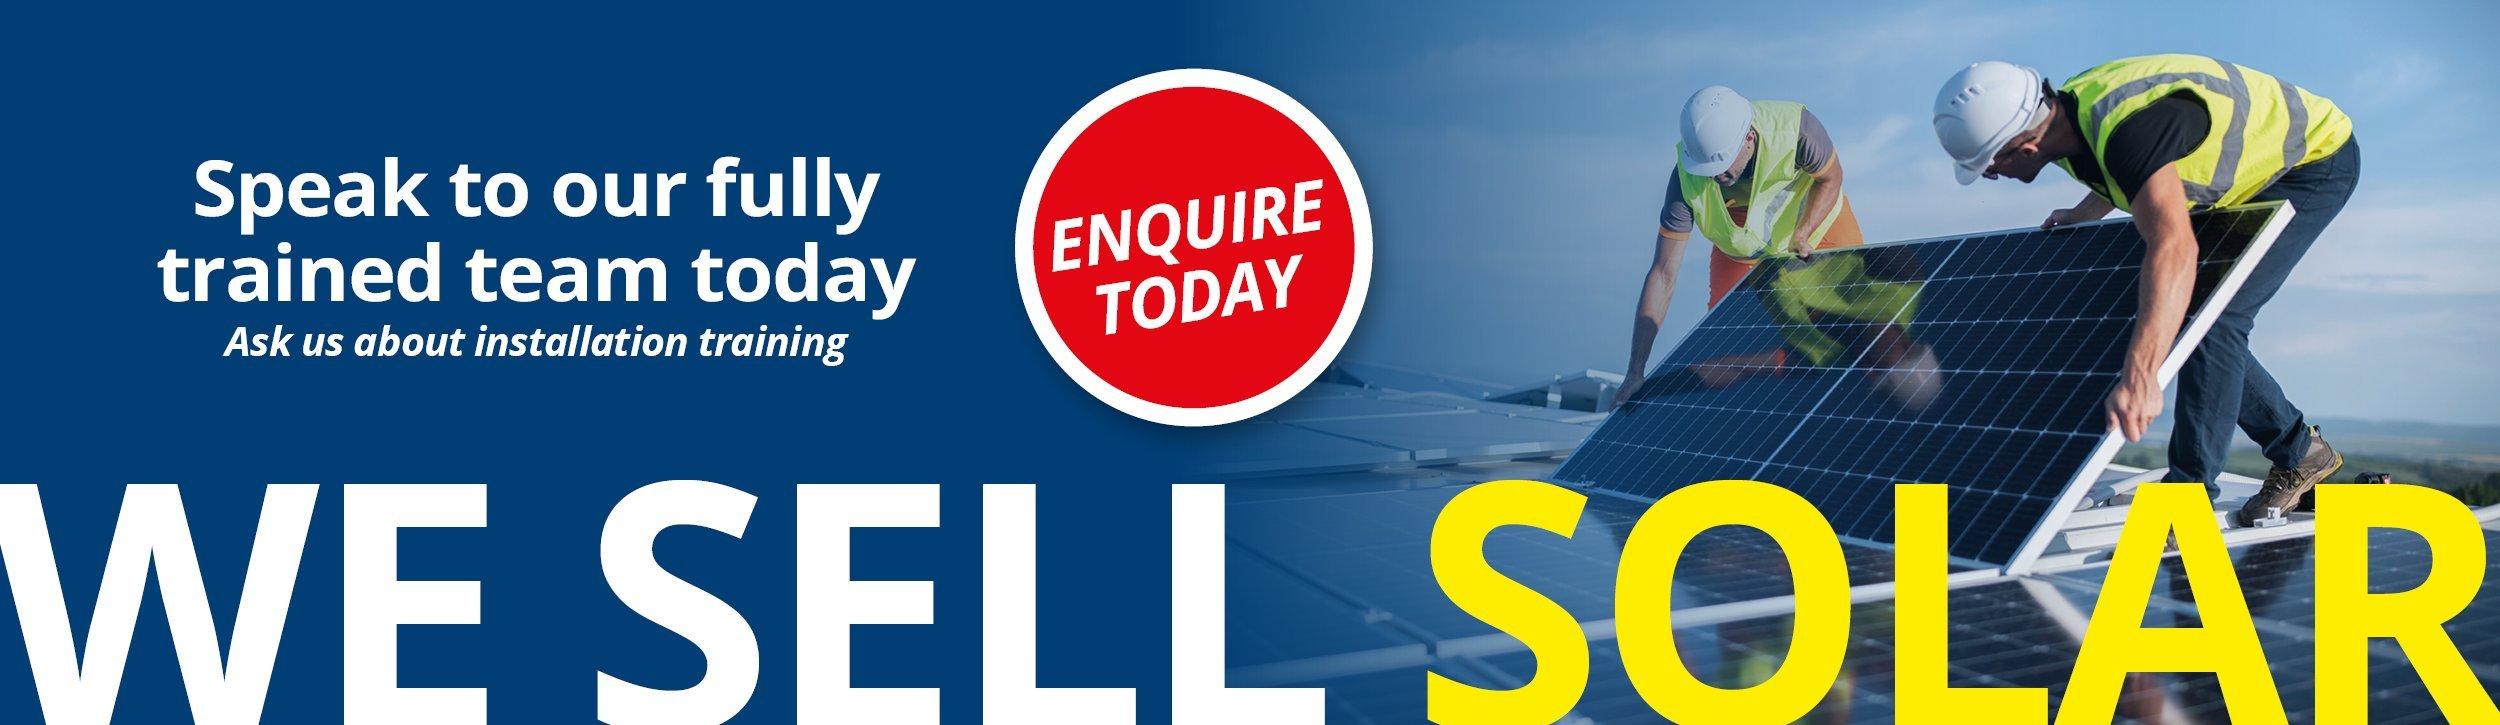 We sell solar. Speak to our fully trained team today!